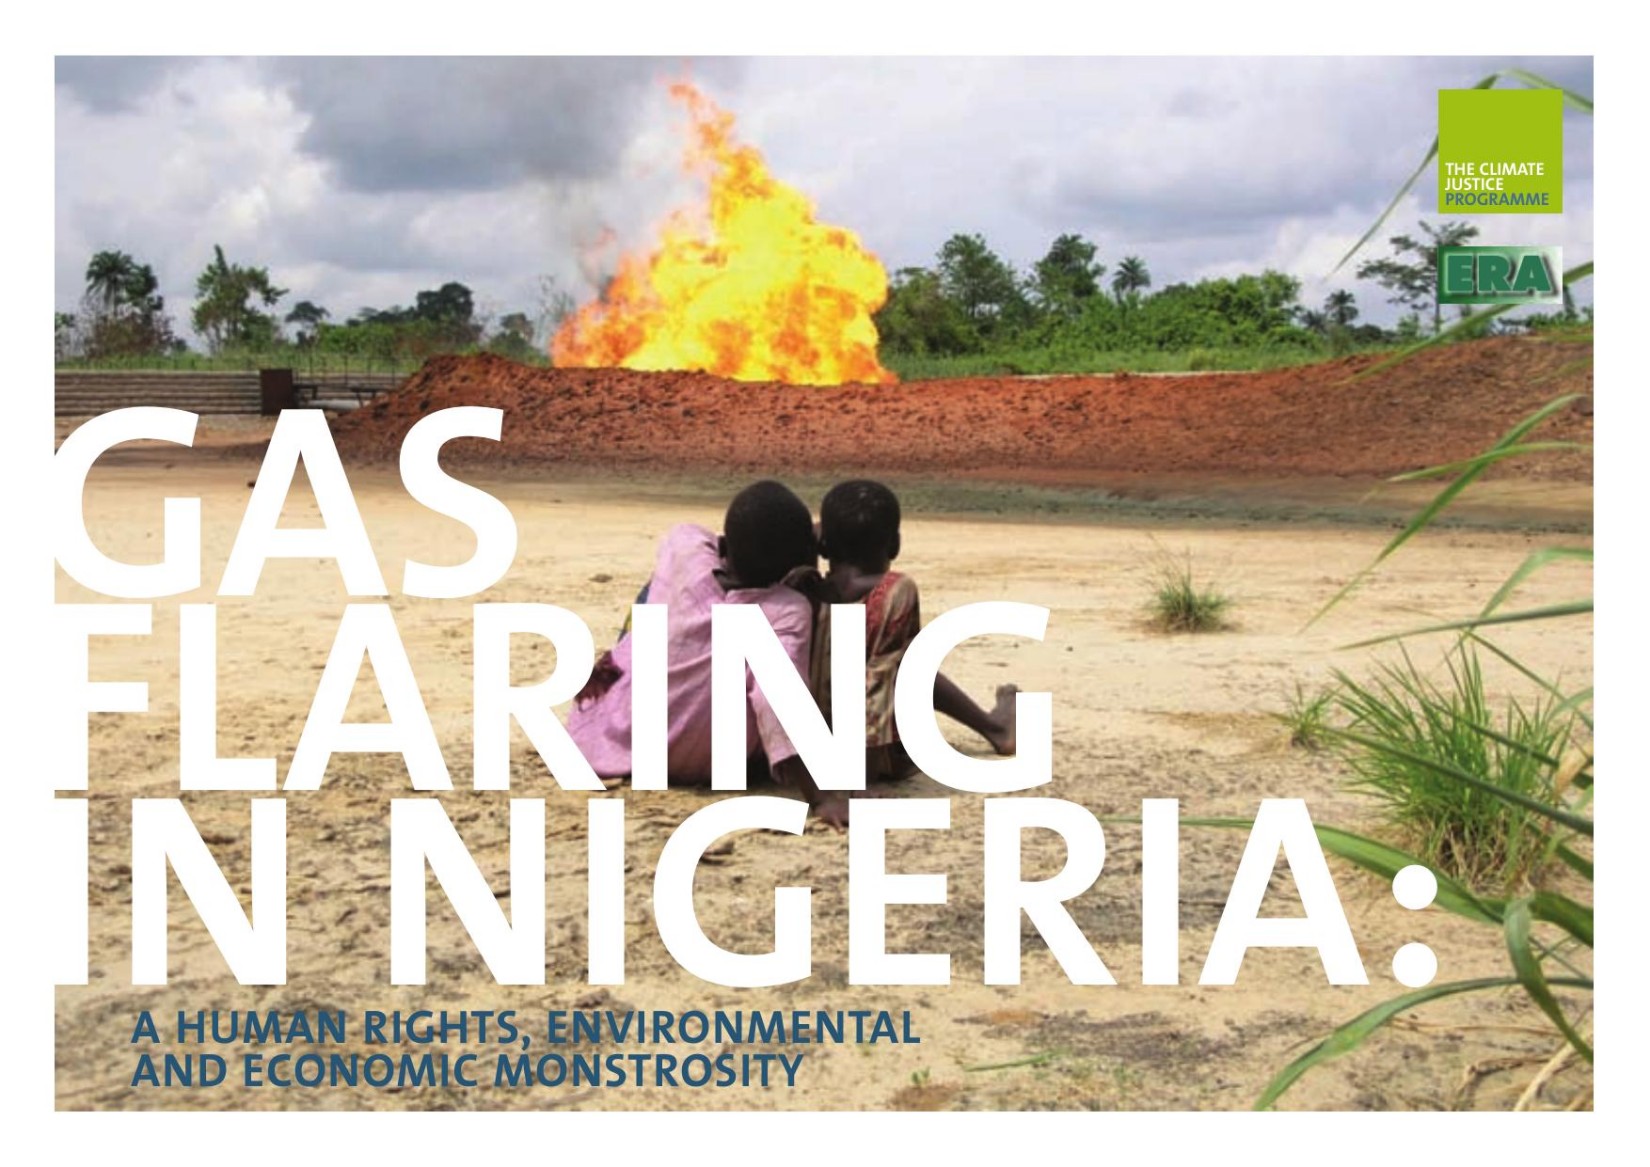 Gas Flaring in Nigeria: a human rights, environmental and economic monstrosity